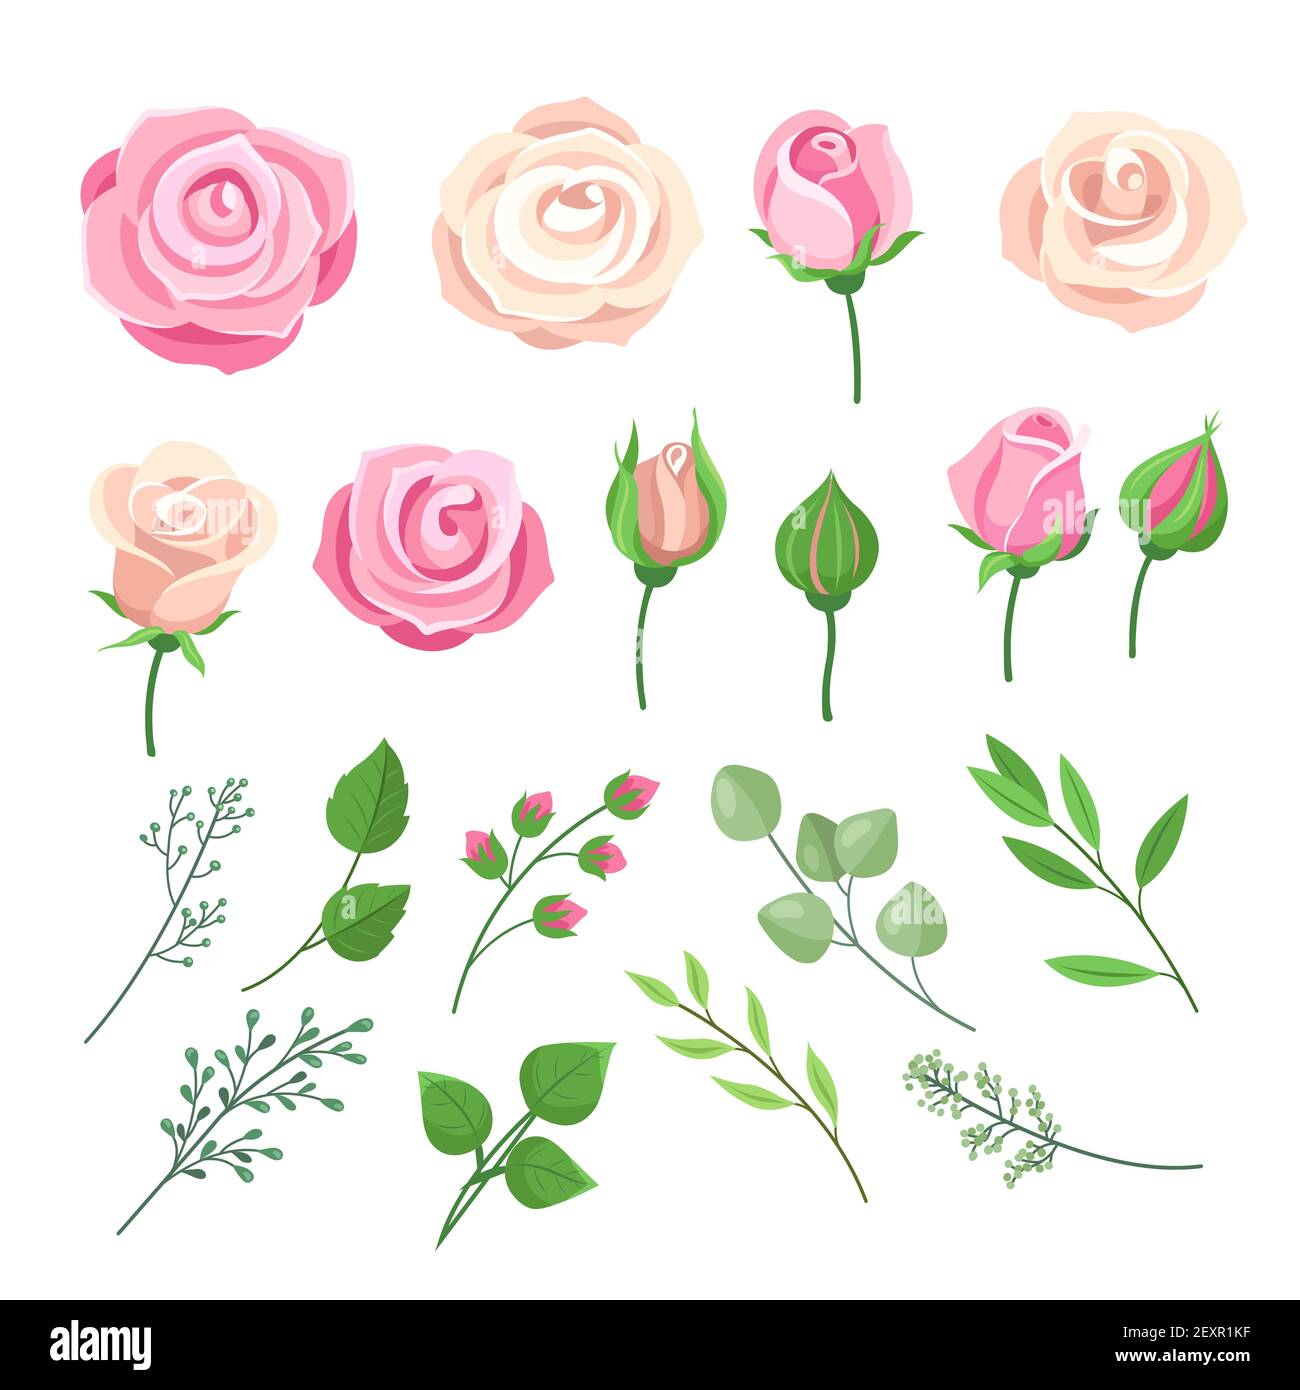 Rose elements. Pink and white roses flowers with green leaves and buds. Watercolor floral romantic wedding decor. Isolated vector set Stock Vector